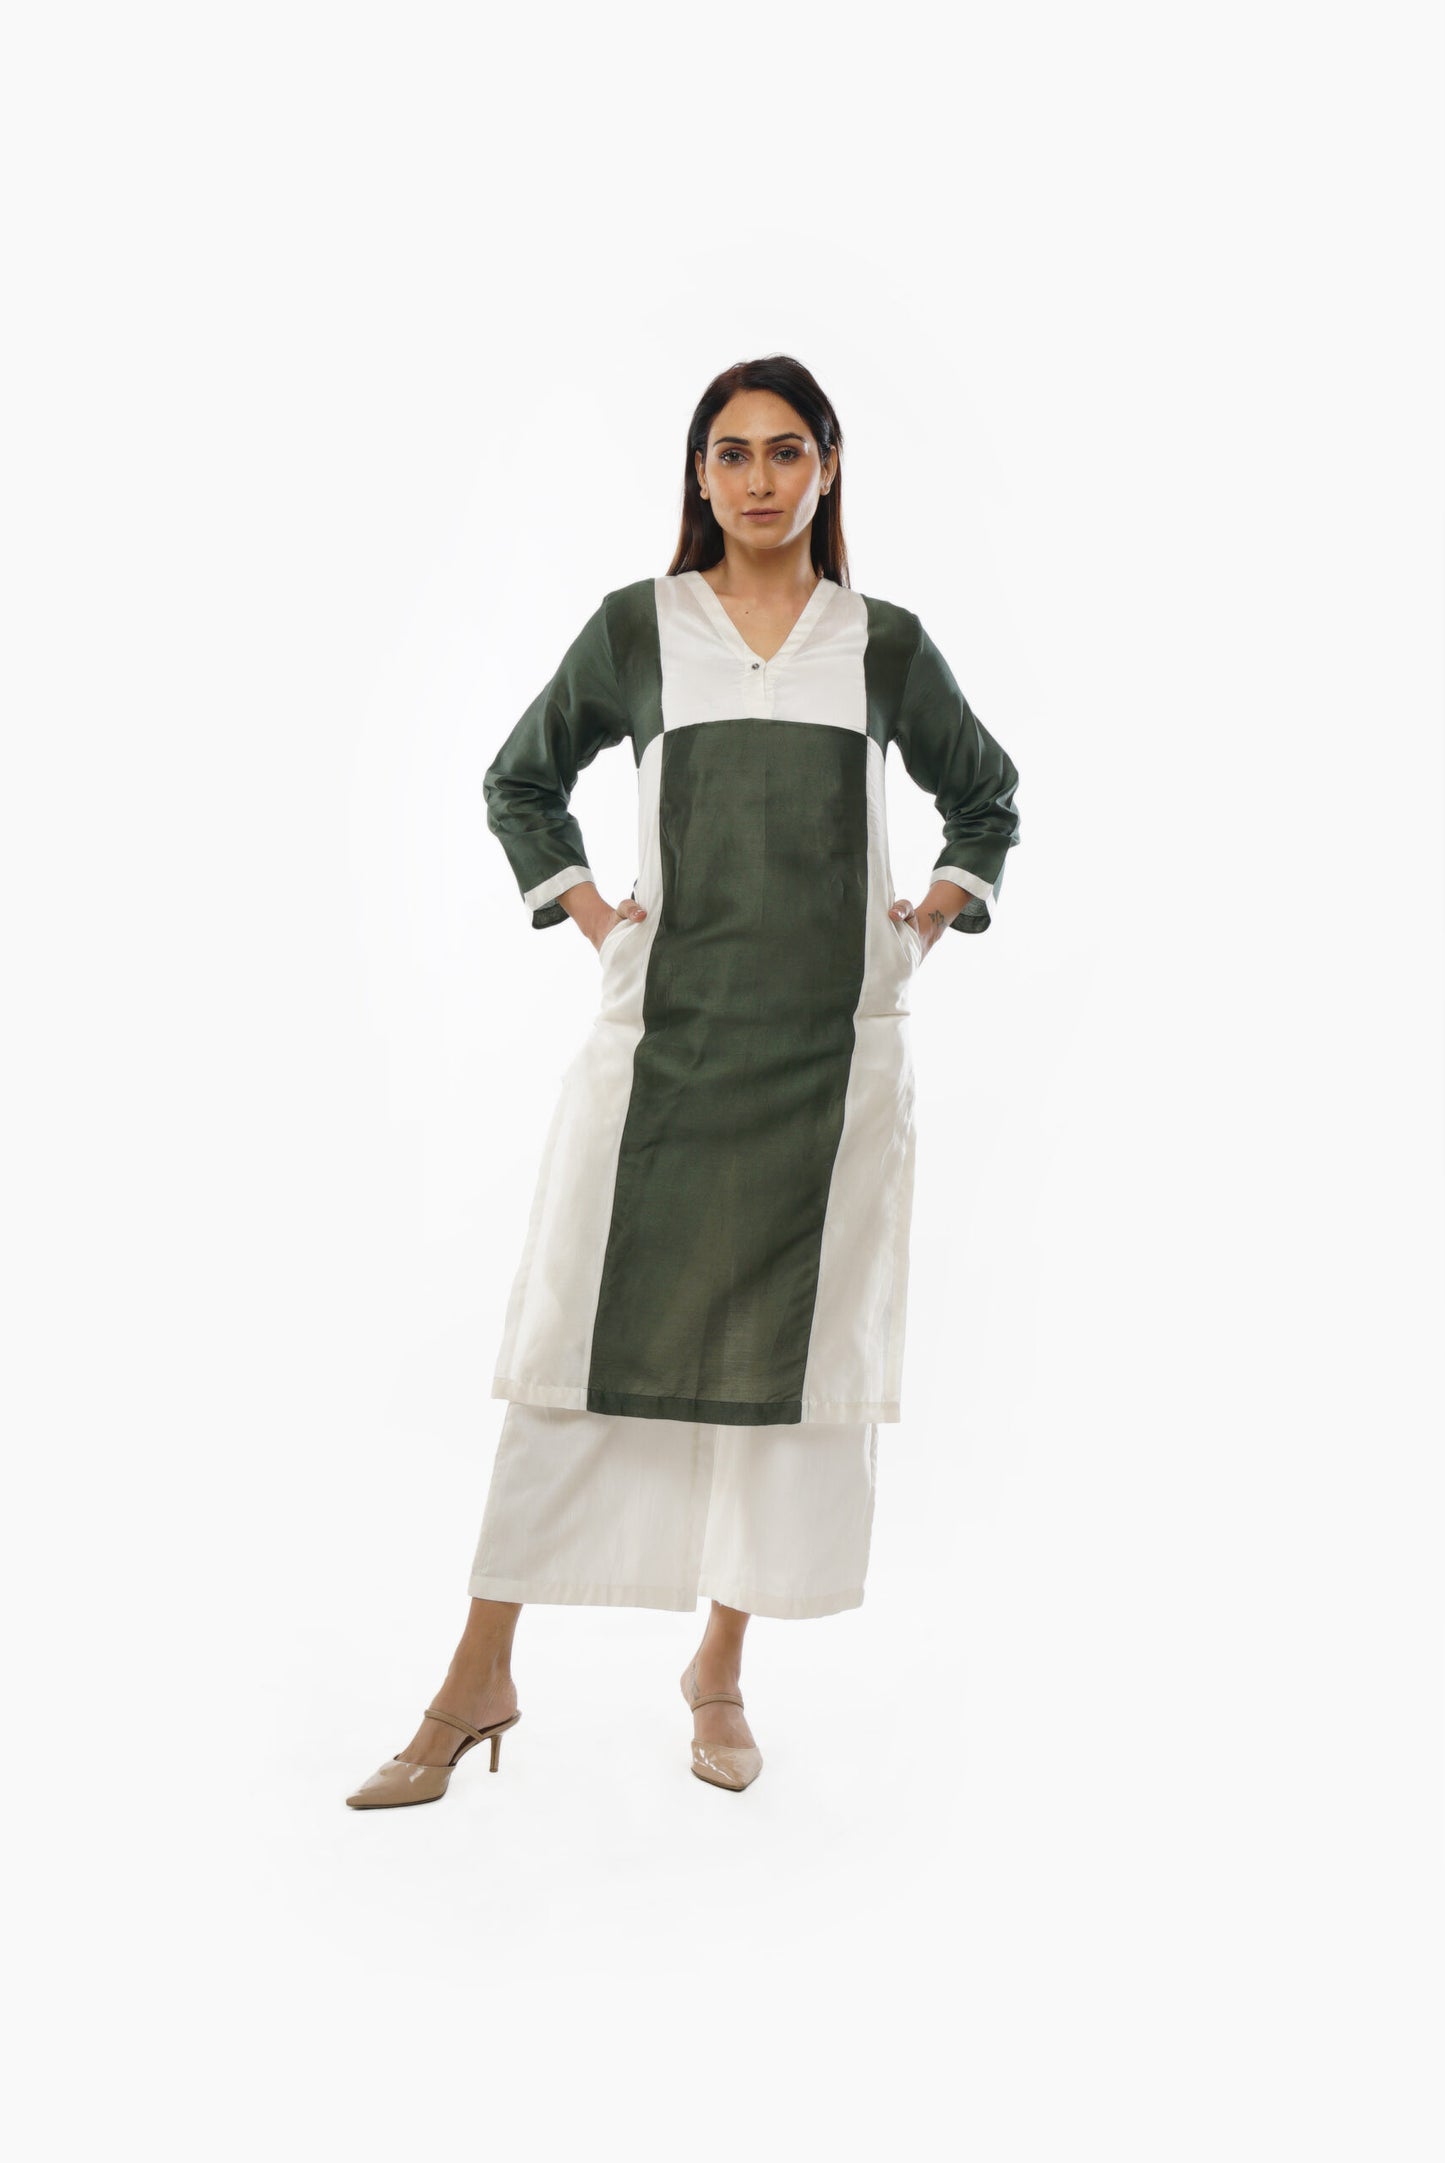 V-Neck Forest Green Top co-ord